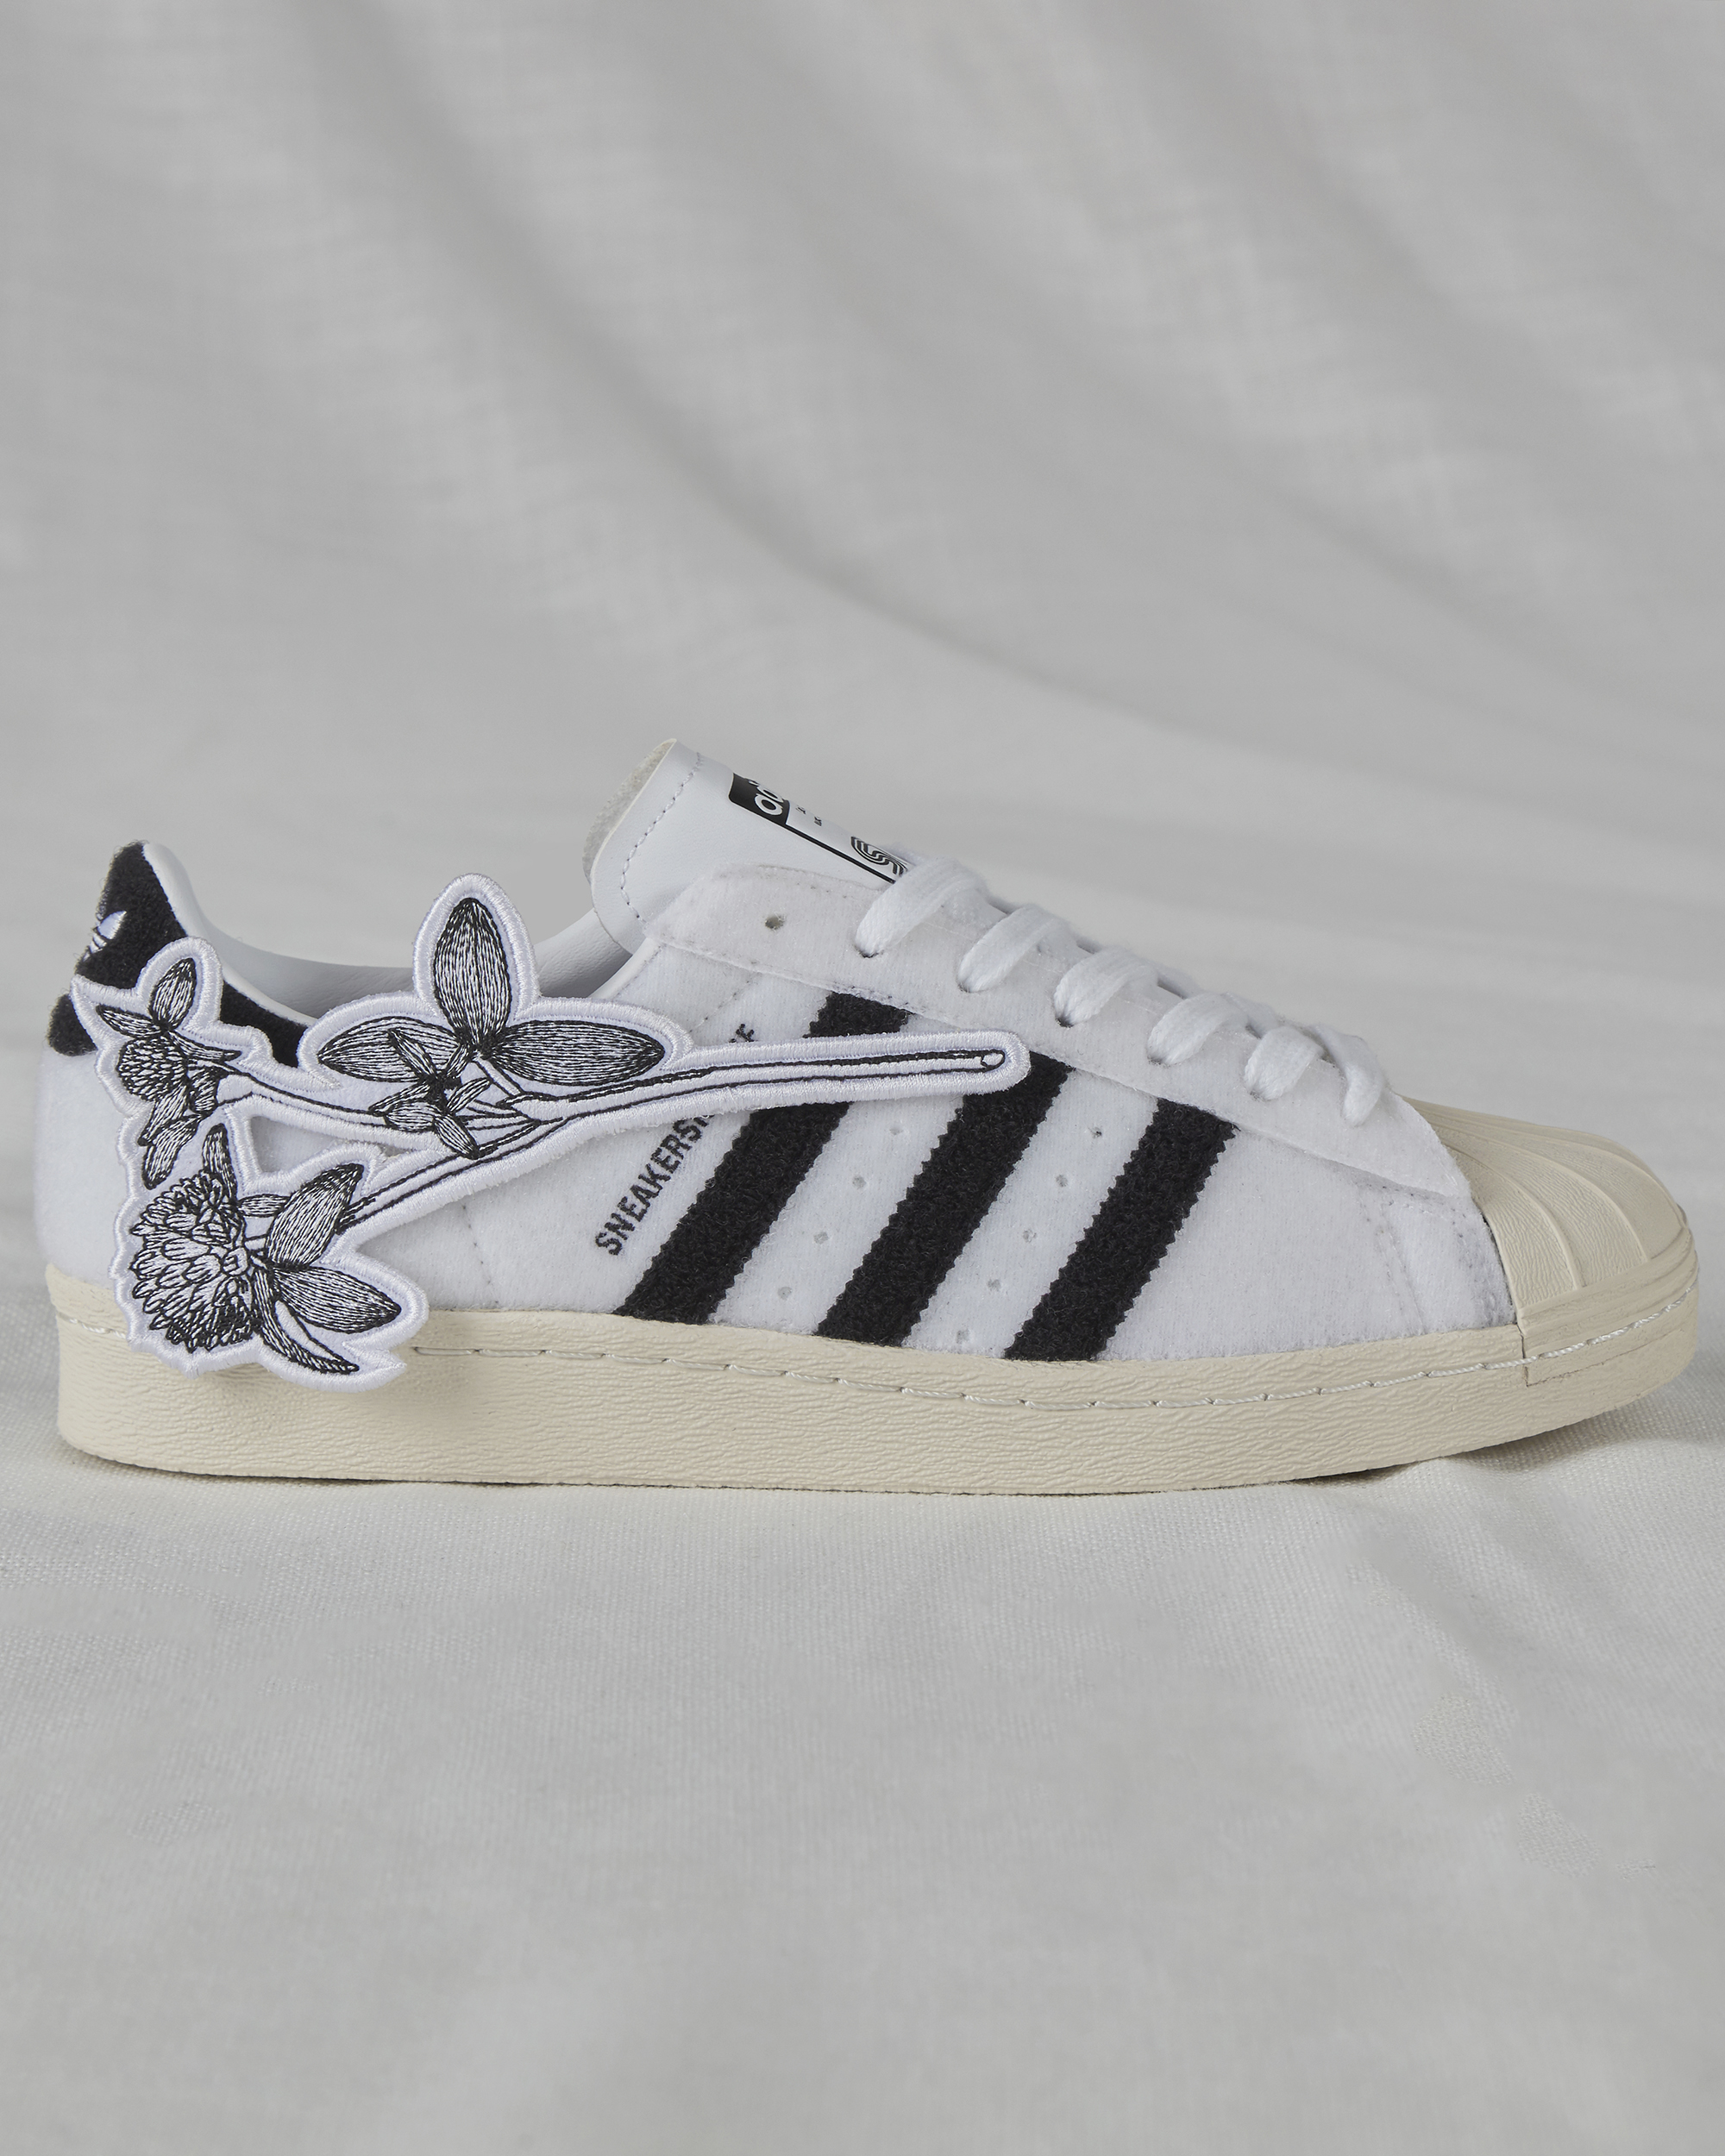 Tarief Fluisteren Opstand SNS on Twitter: "The adidas Superstar by SNS comes with four patches to  customize the Velcro upper and offers you further endless possibilities to  make these your personal unique pair. Sign-ups are